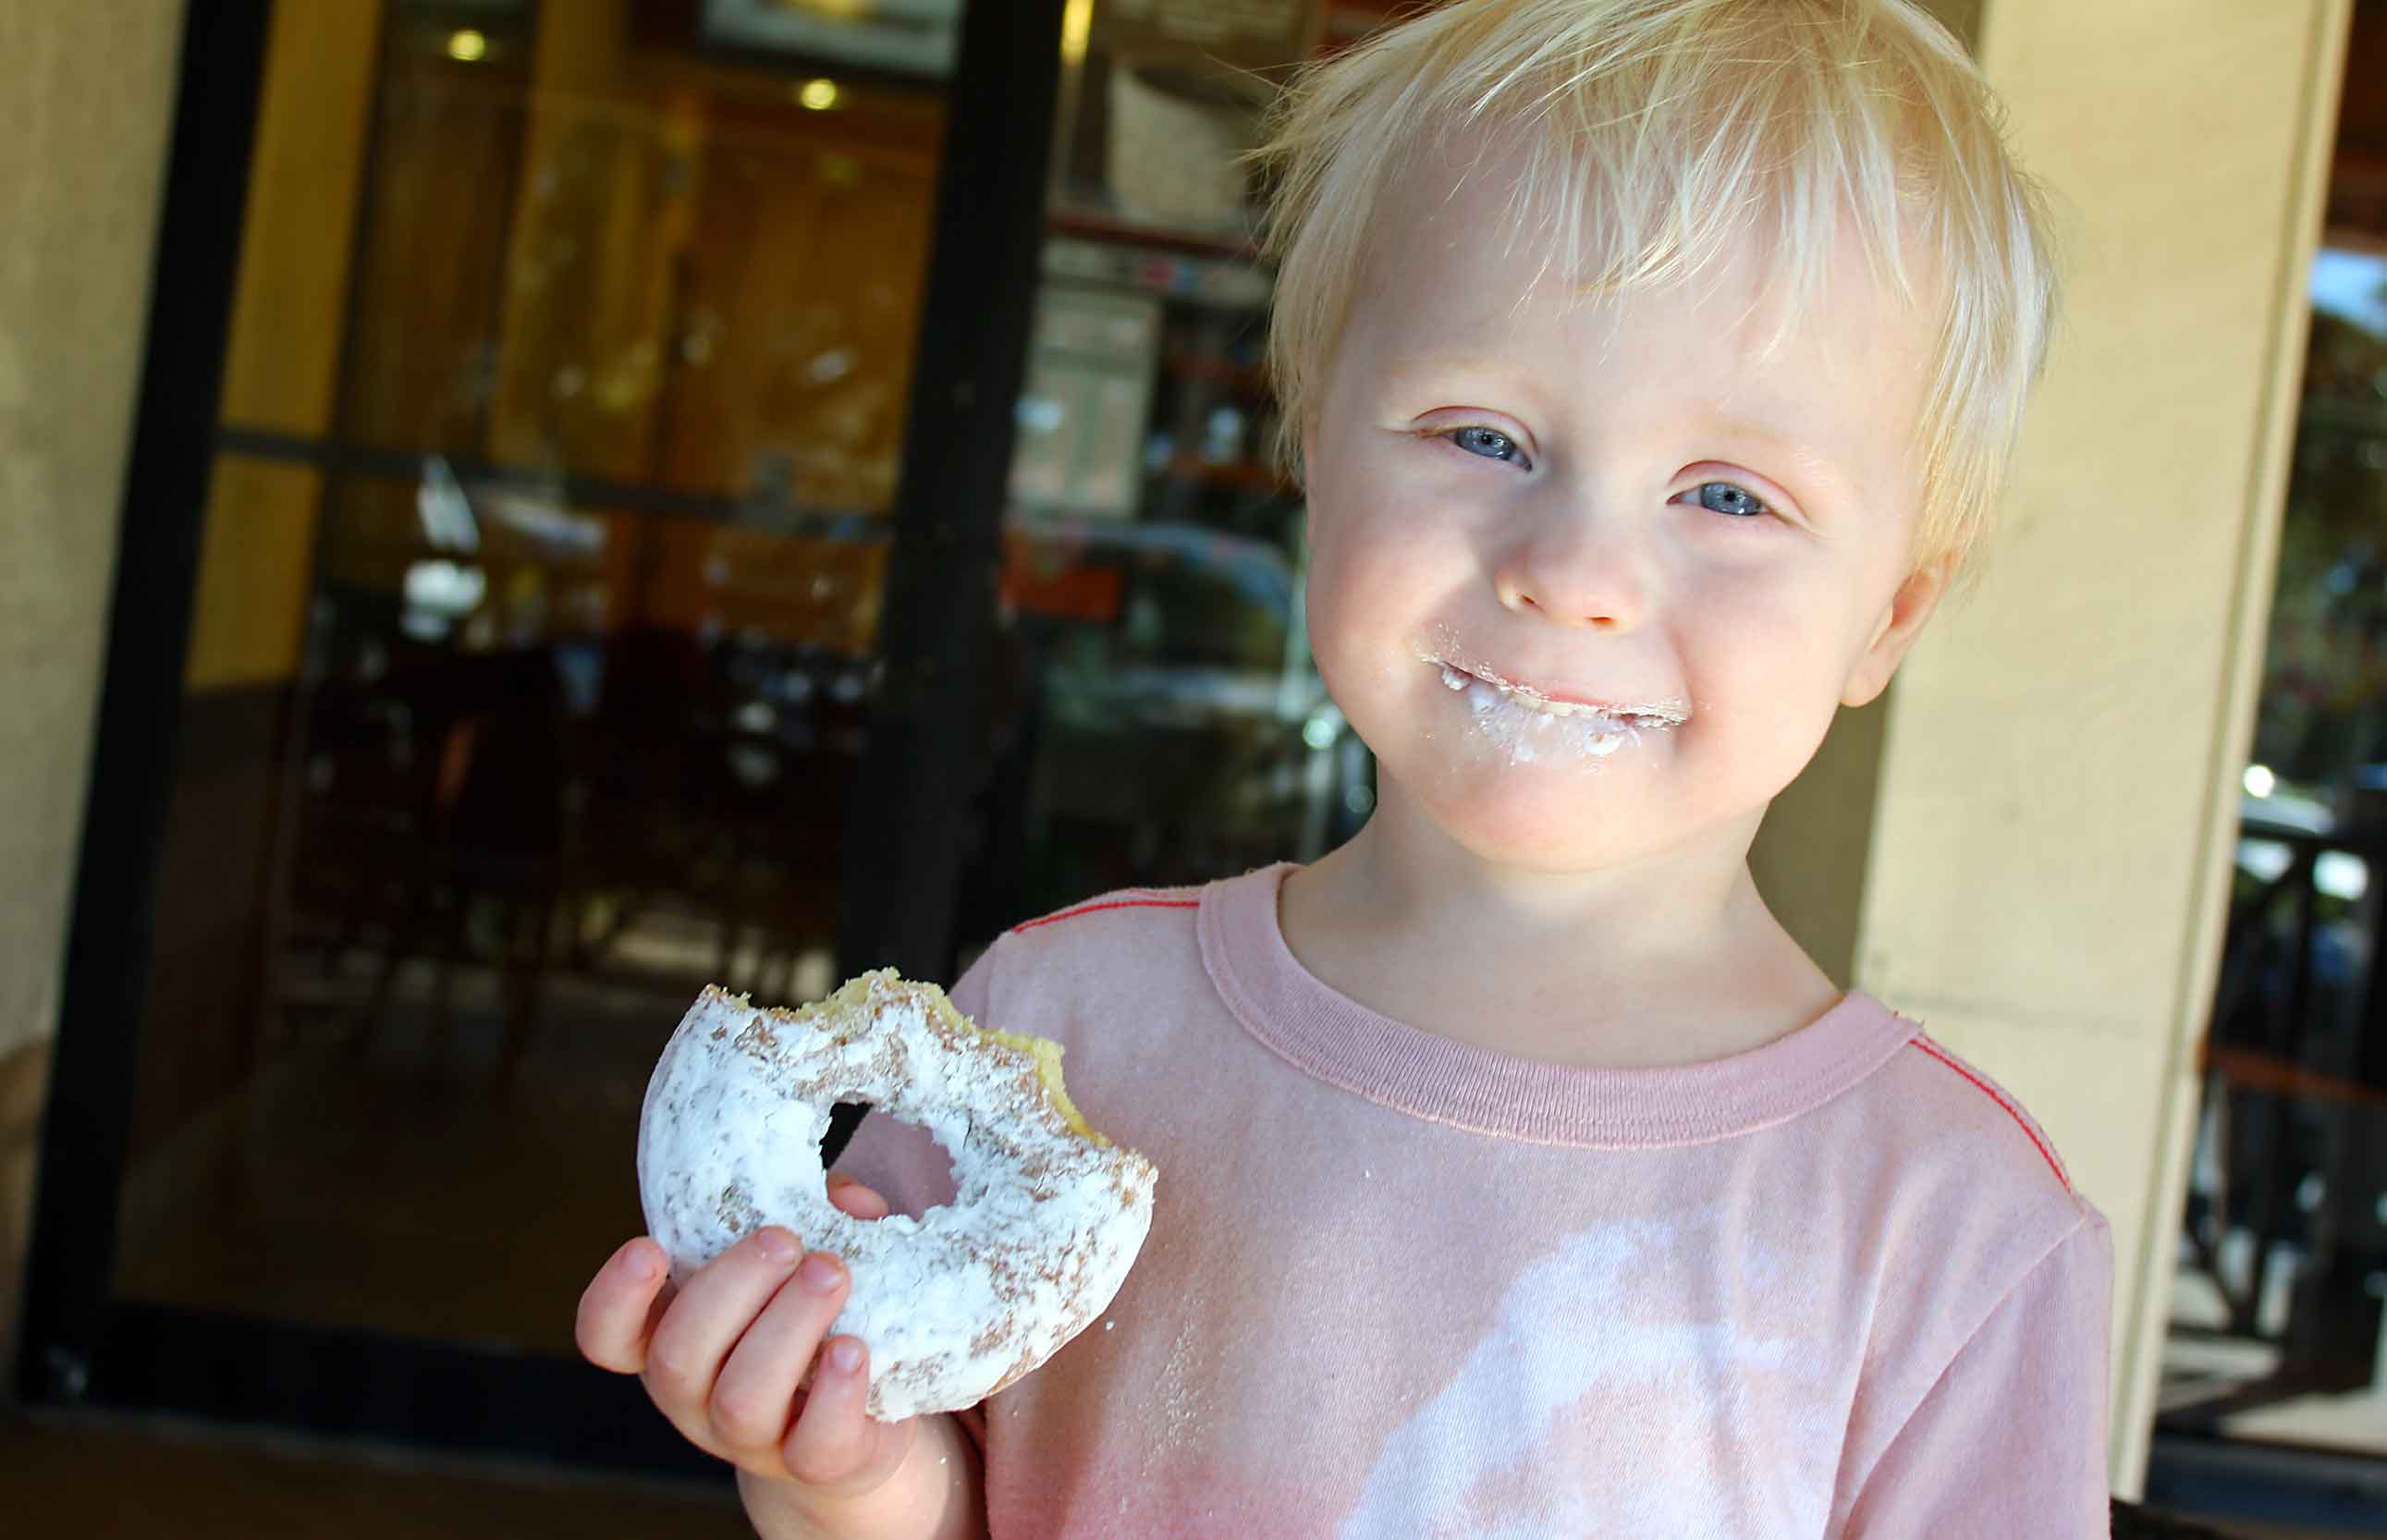 Because the best kind of donut is a free donut.